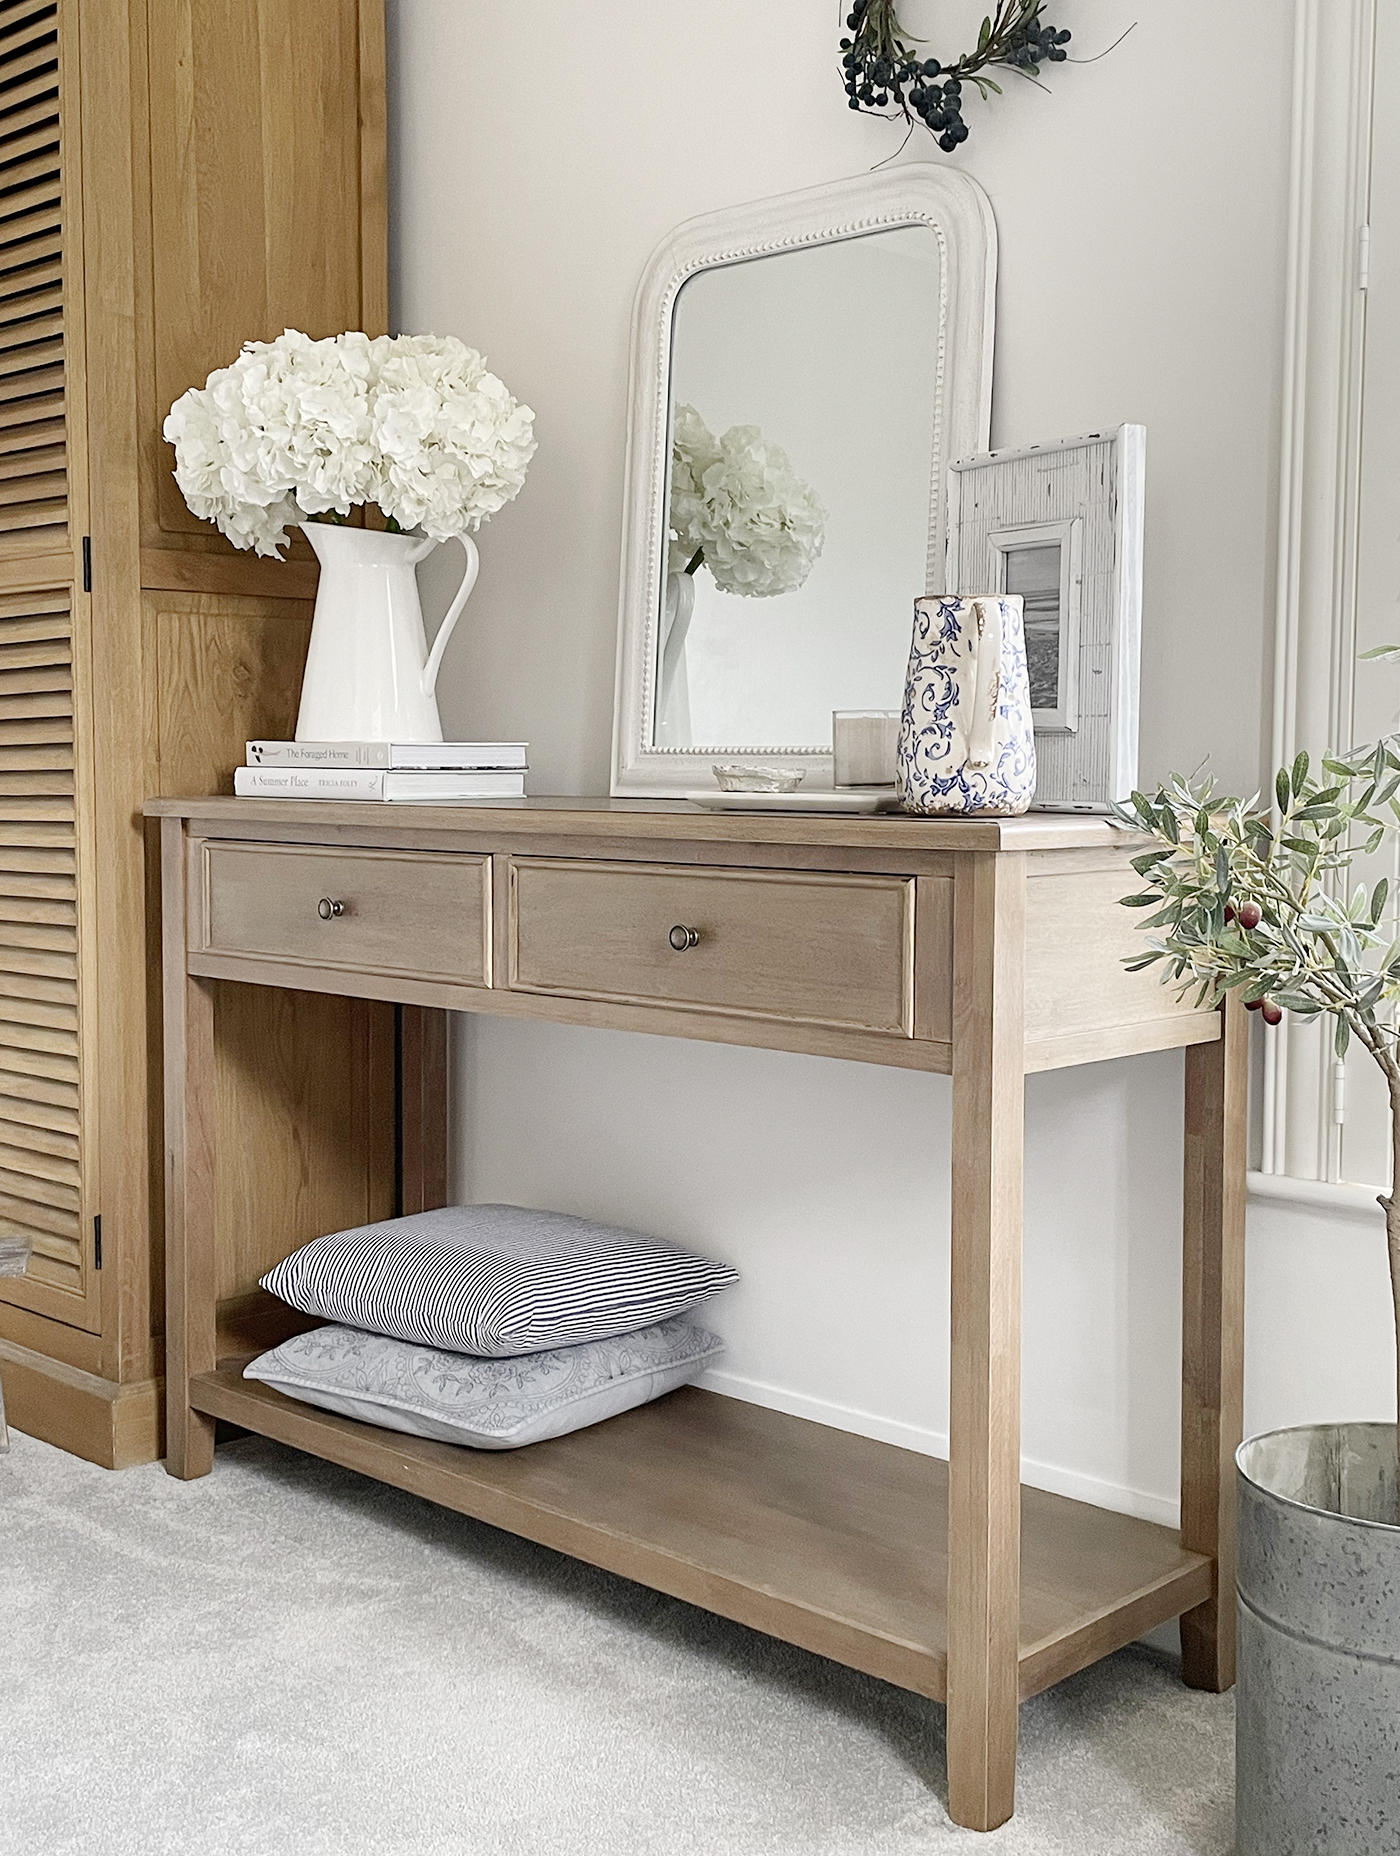 Berkshire console table for New England Hallway , living room and bedroom furniture in coastal and country styled homes and interiors